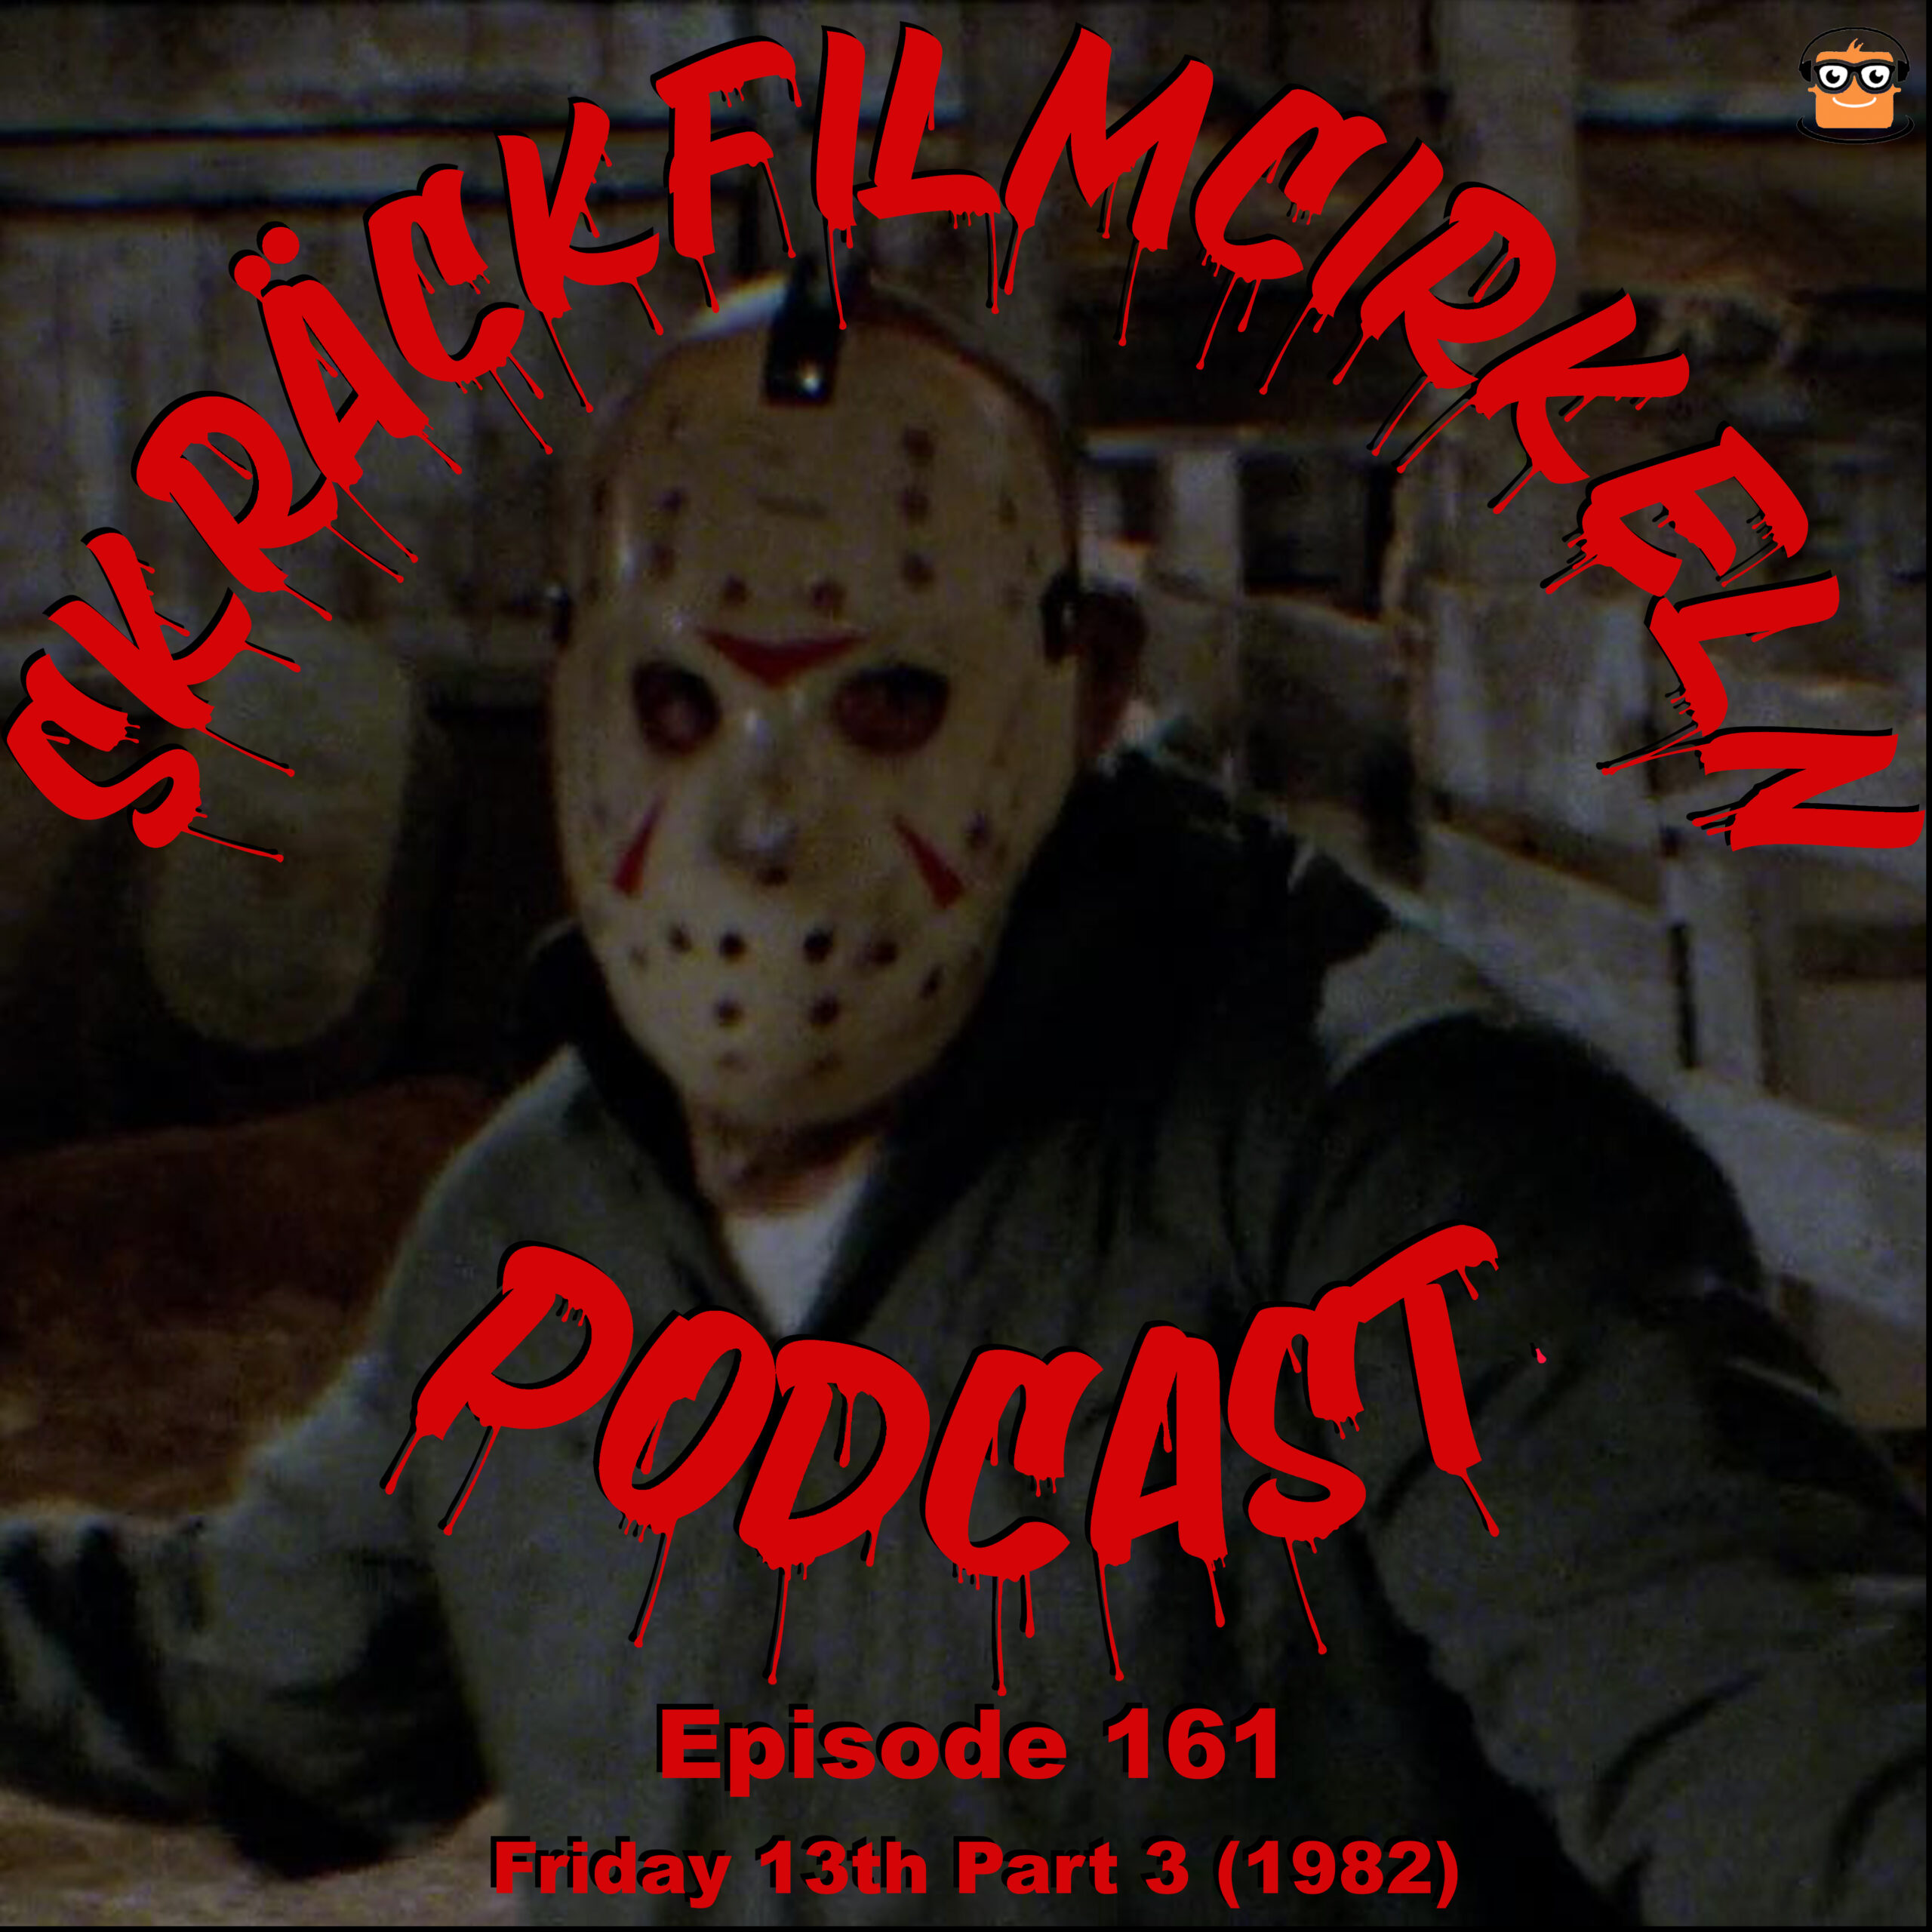 Episode 161 – Friday 13th Part 3 (1982)